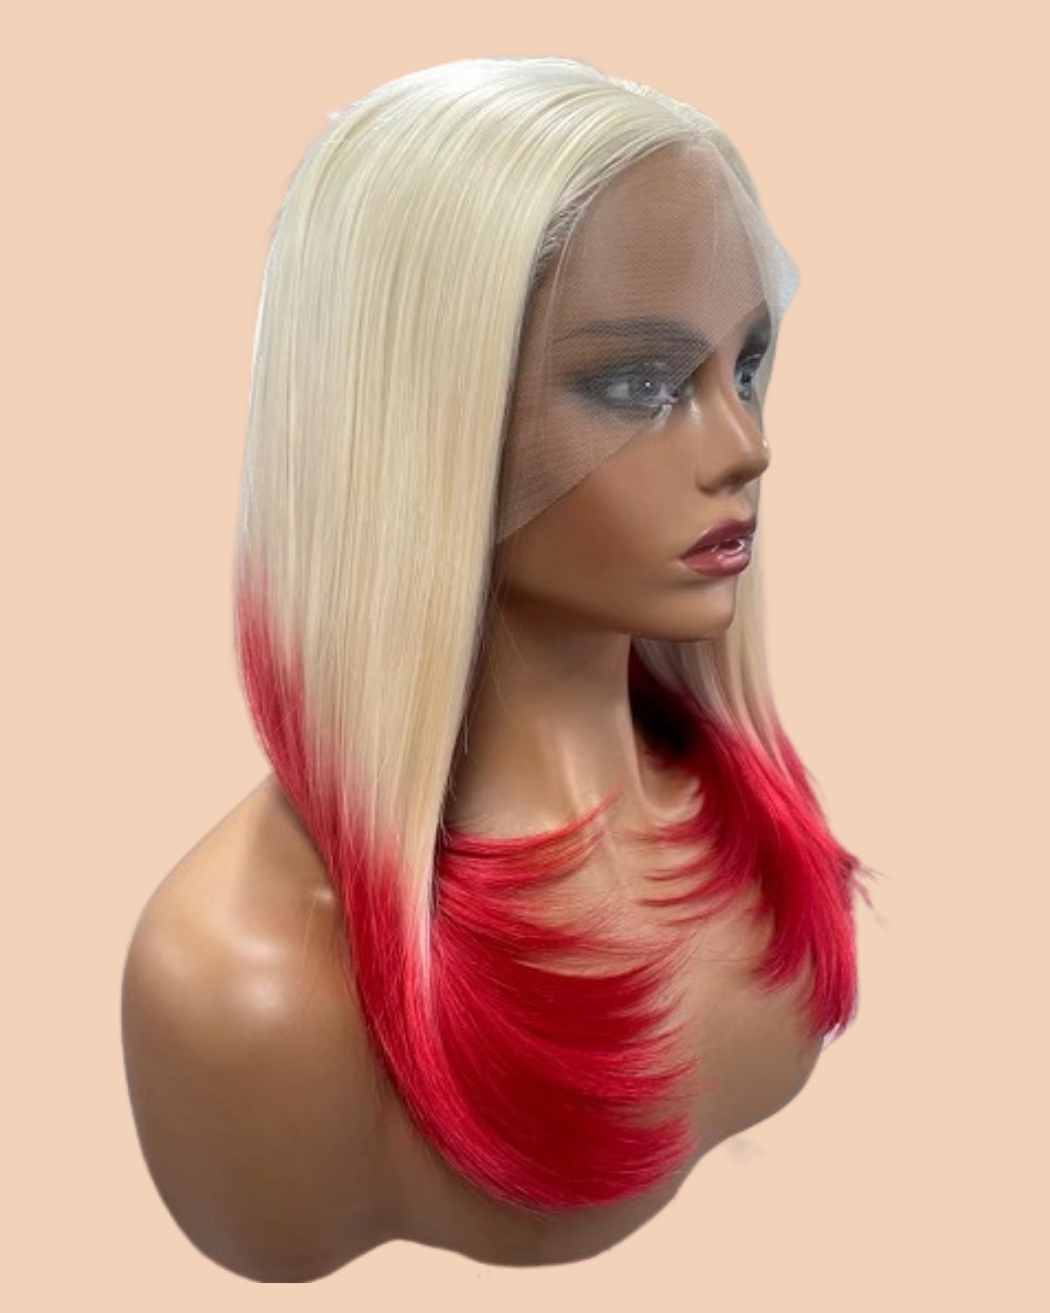 Selena - Blonde Lace Front wig with Pink ends image cap